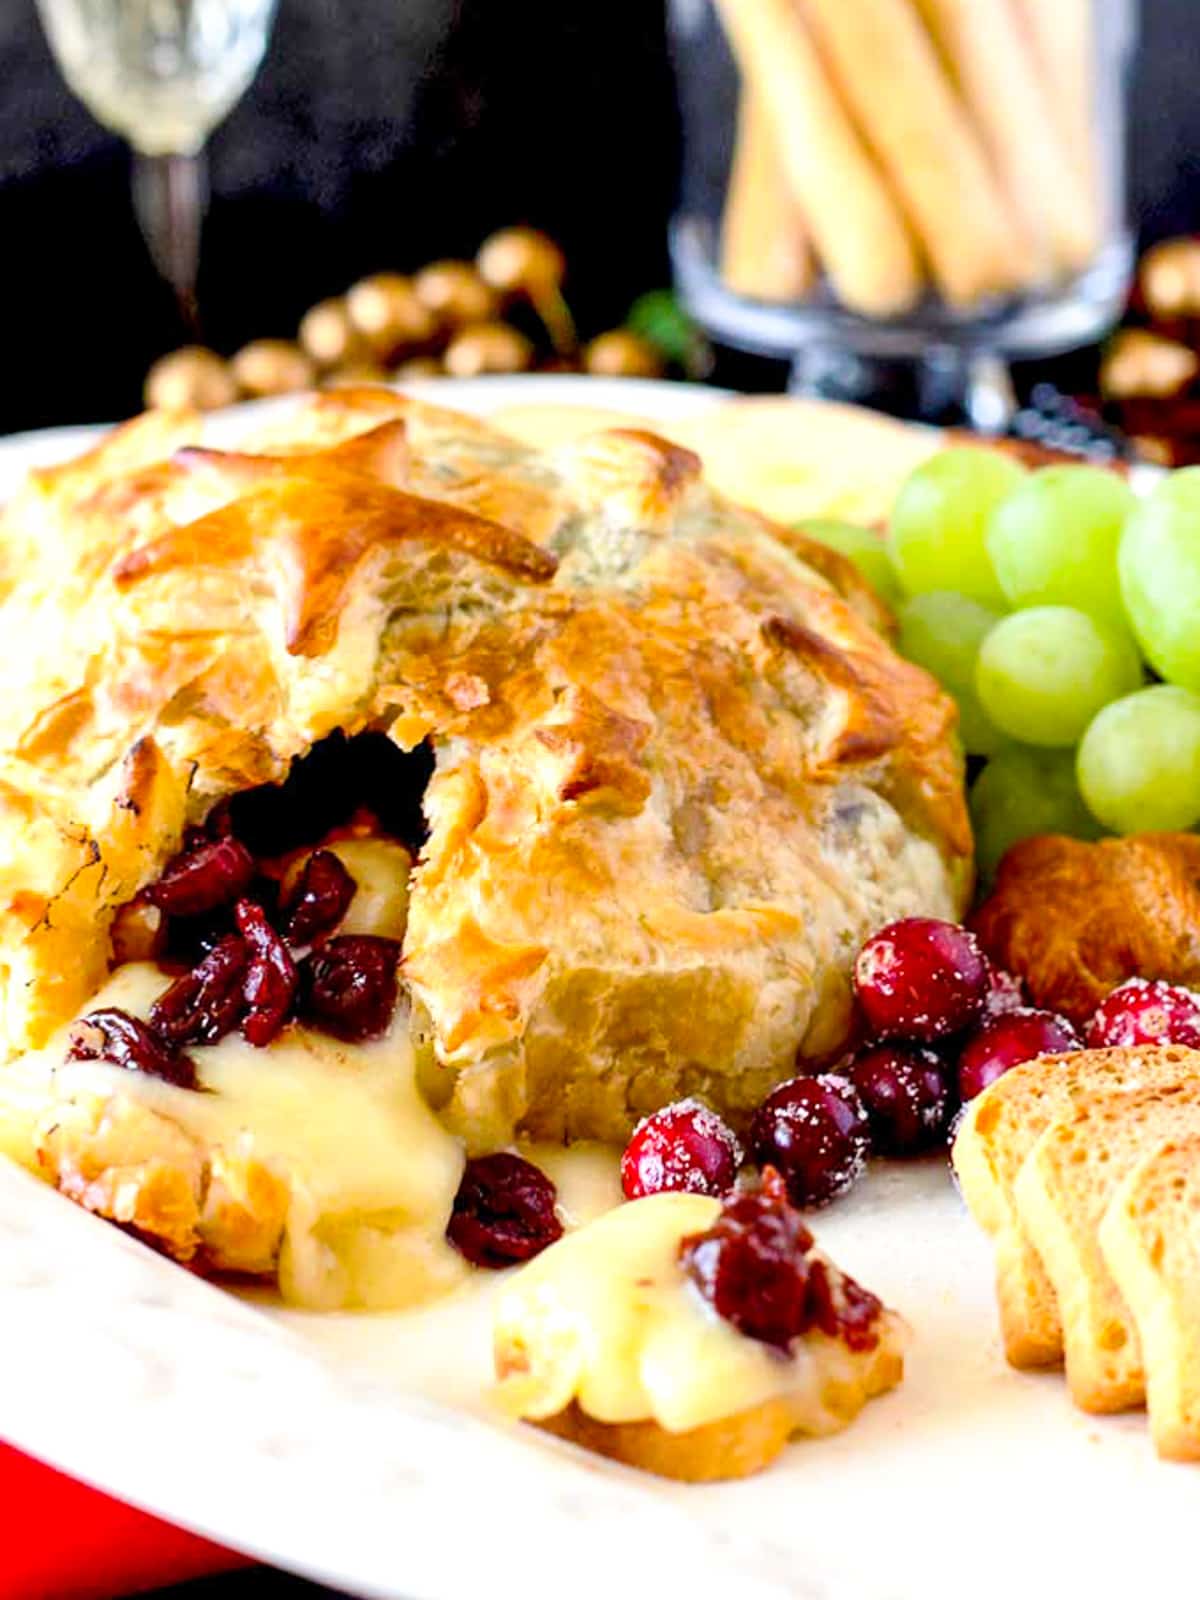 Baked Brie with Maple Syrup and Bacon - Fantabulosity